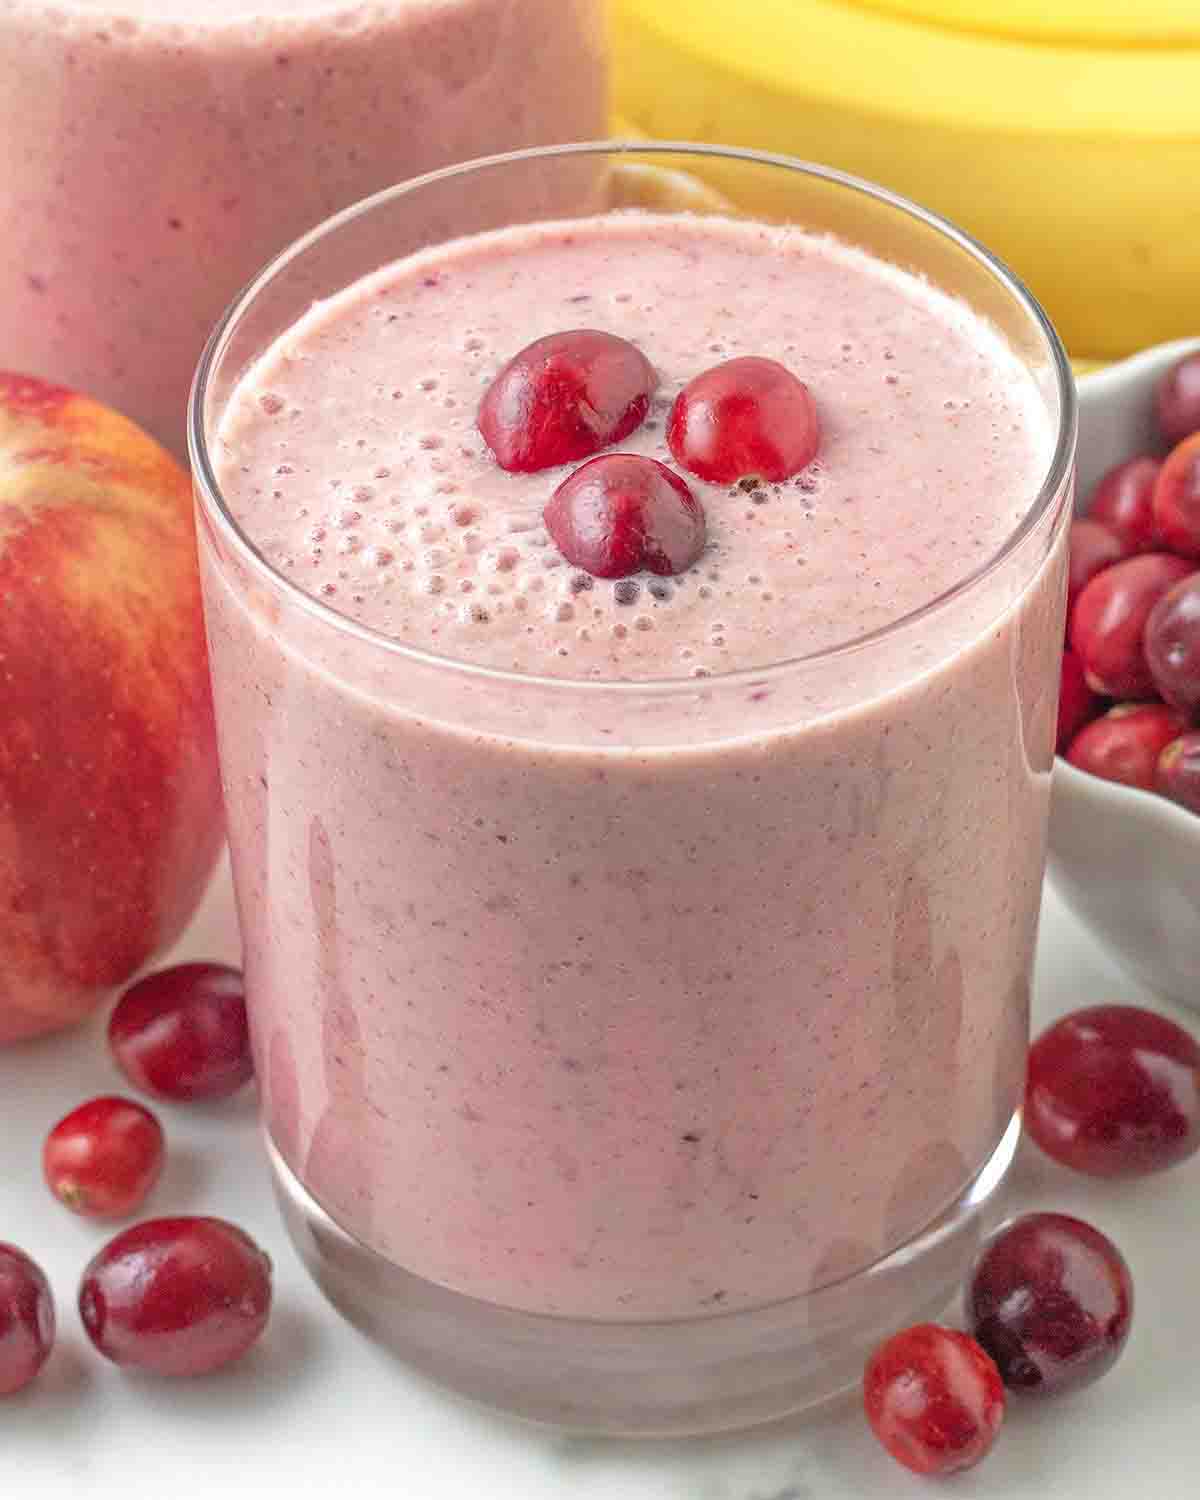 A glass of apple cranberry smoothie, the glass is surrounded by fresh cranberries.